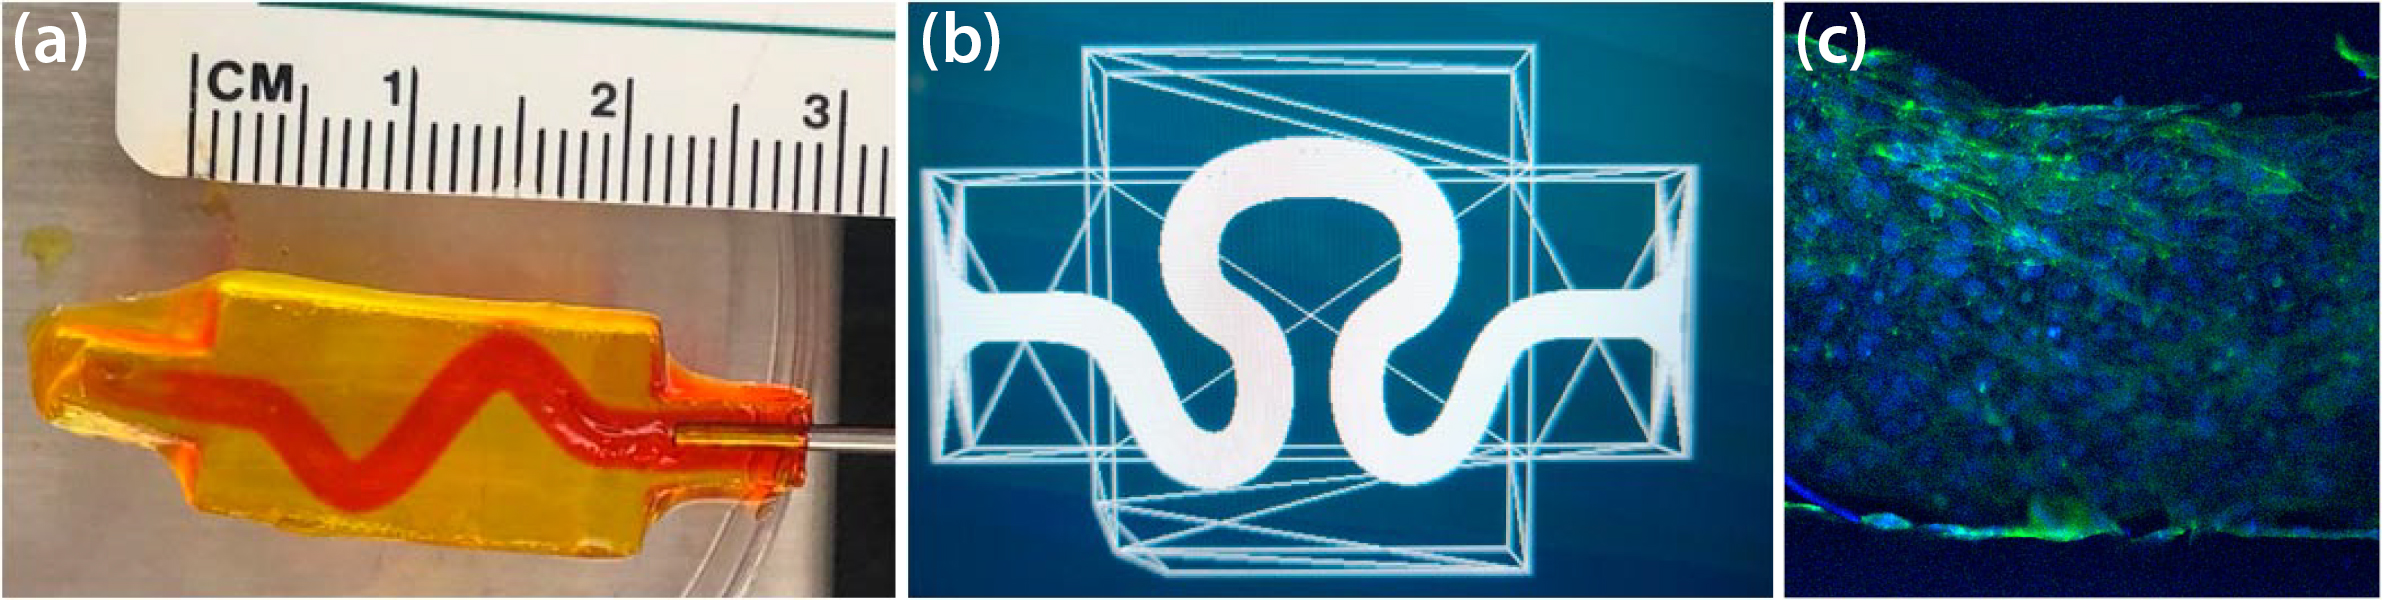 &lt;strong&gt;Figure 1.&lt;/strong&gt; Generated channel geometries with different degrees of tortuosity and channel diameter. &lt;strong&gt;1a.&lt;/strong&gt; Channel perfusion with dye. &lt;strong&gt;1b.&lt;/strong&gt; A different channel geometry model. &lt;strong&gt;1c.&lt;/strong&gt; A vascularized channel with human umbilical vein endothelial cells after three days in a culture. Figure courtesy of the research lab of Chris Bashur (unpublished data).